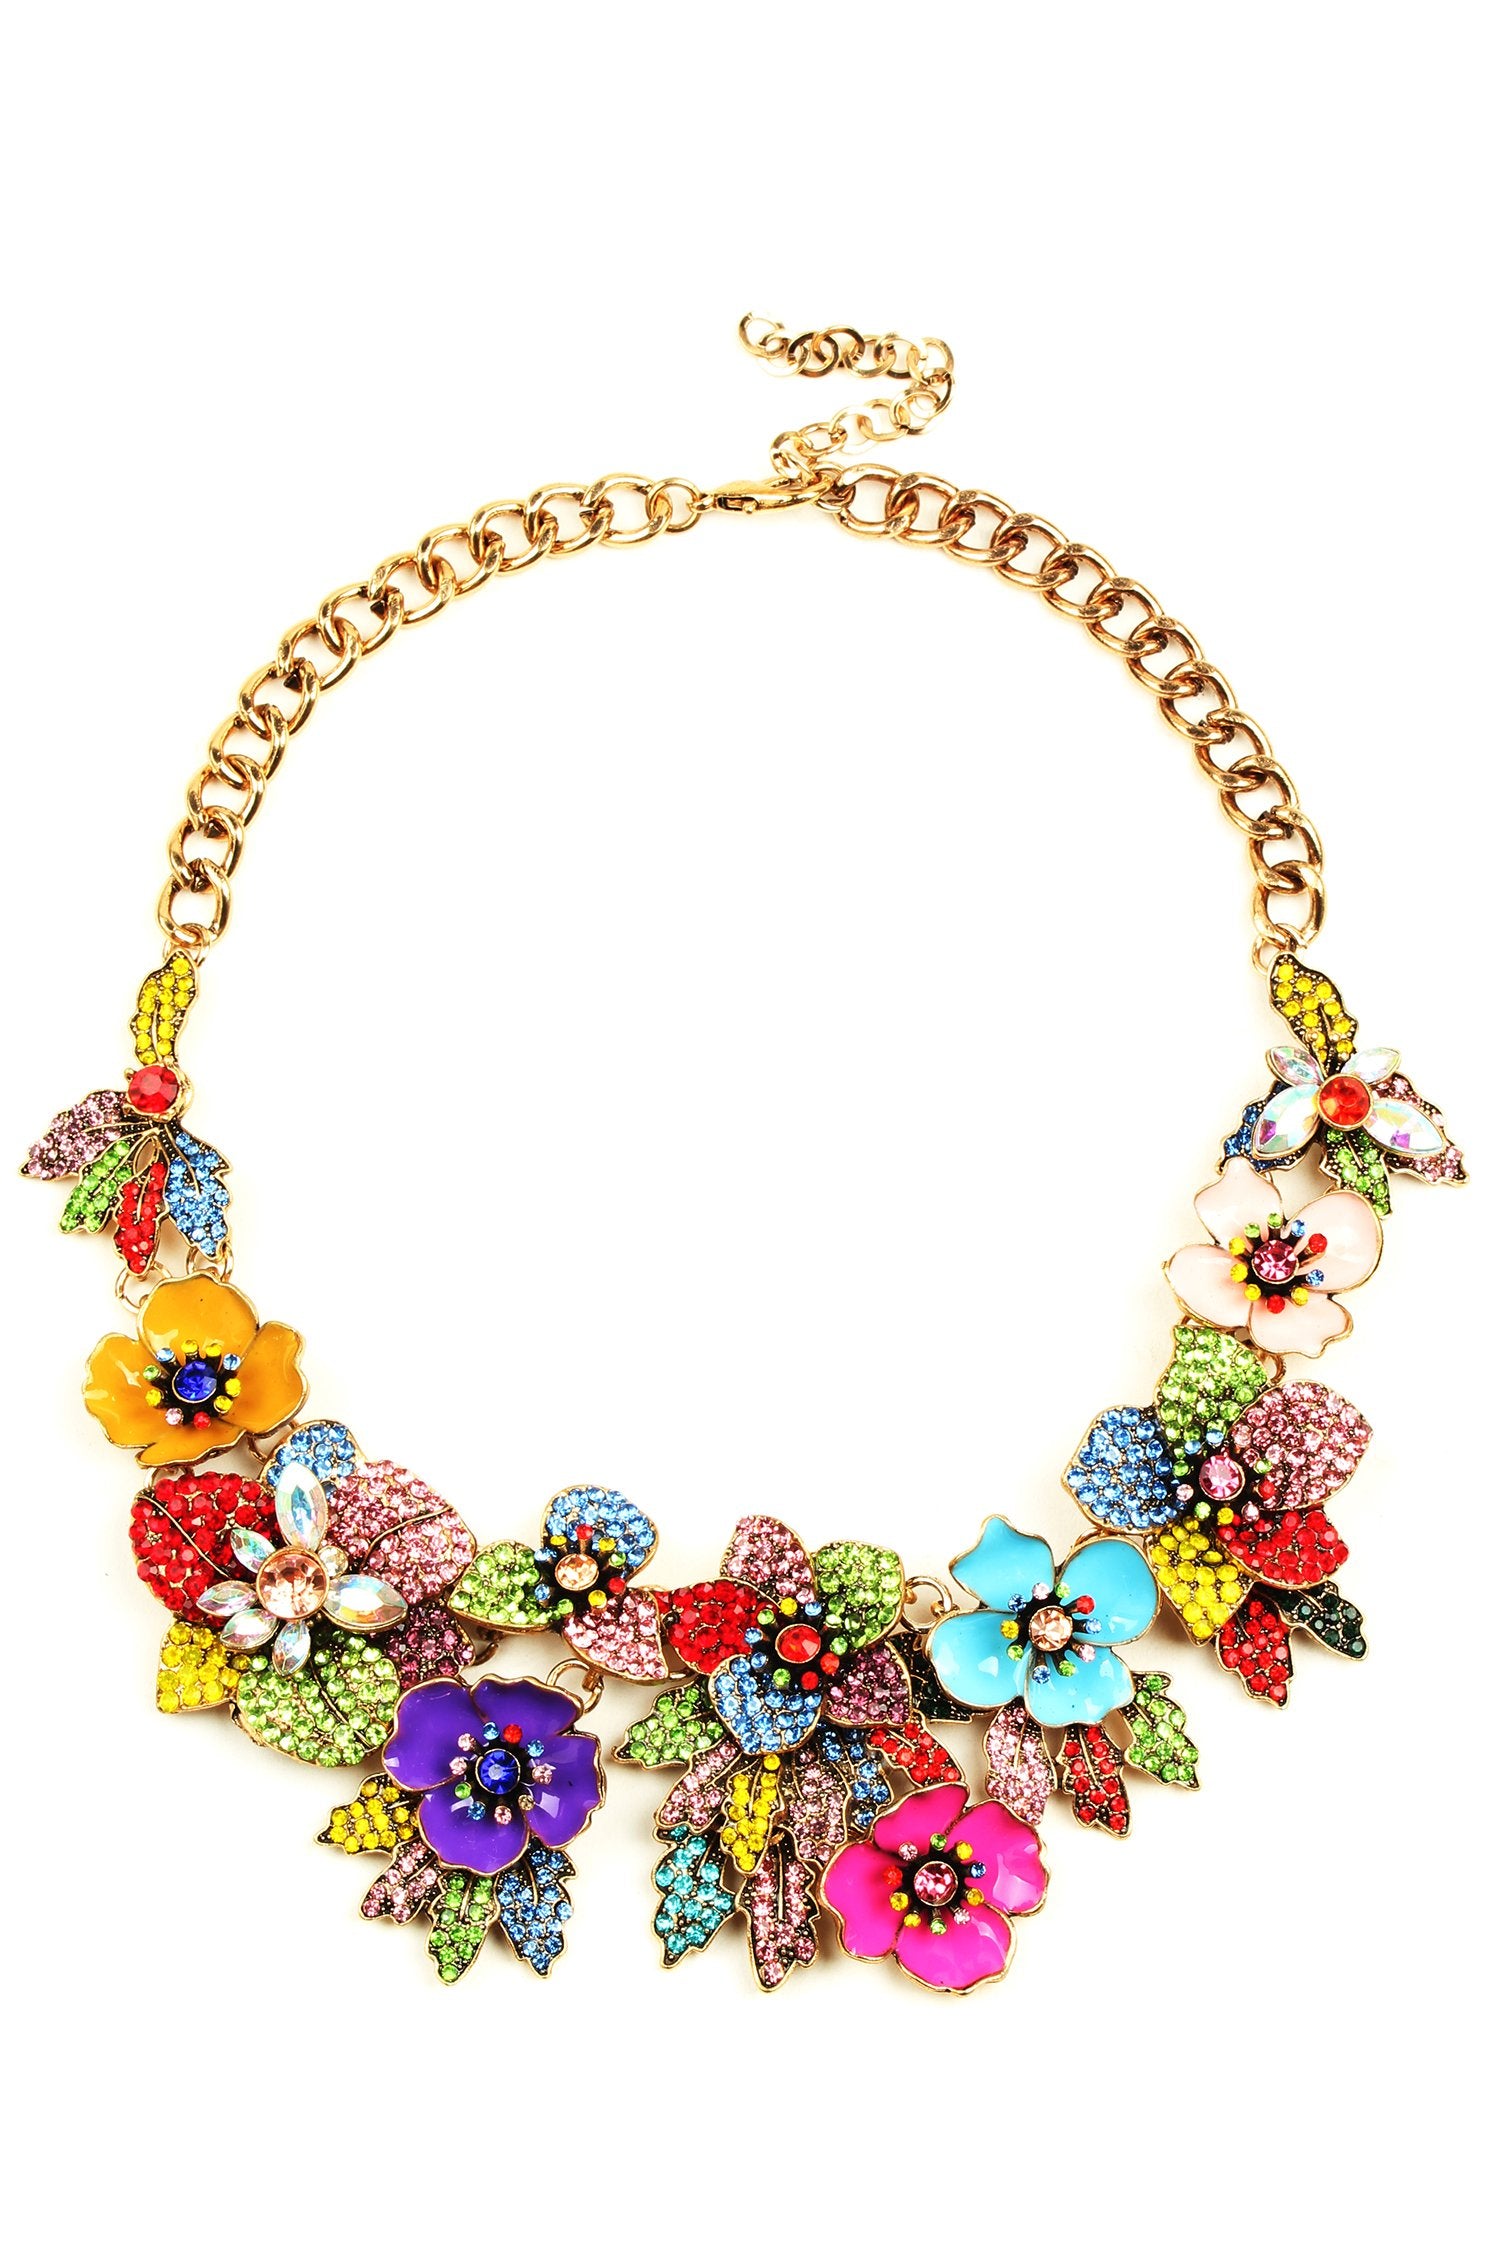 Pearlized Textured Metal Flower Statement Necklace